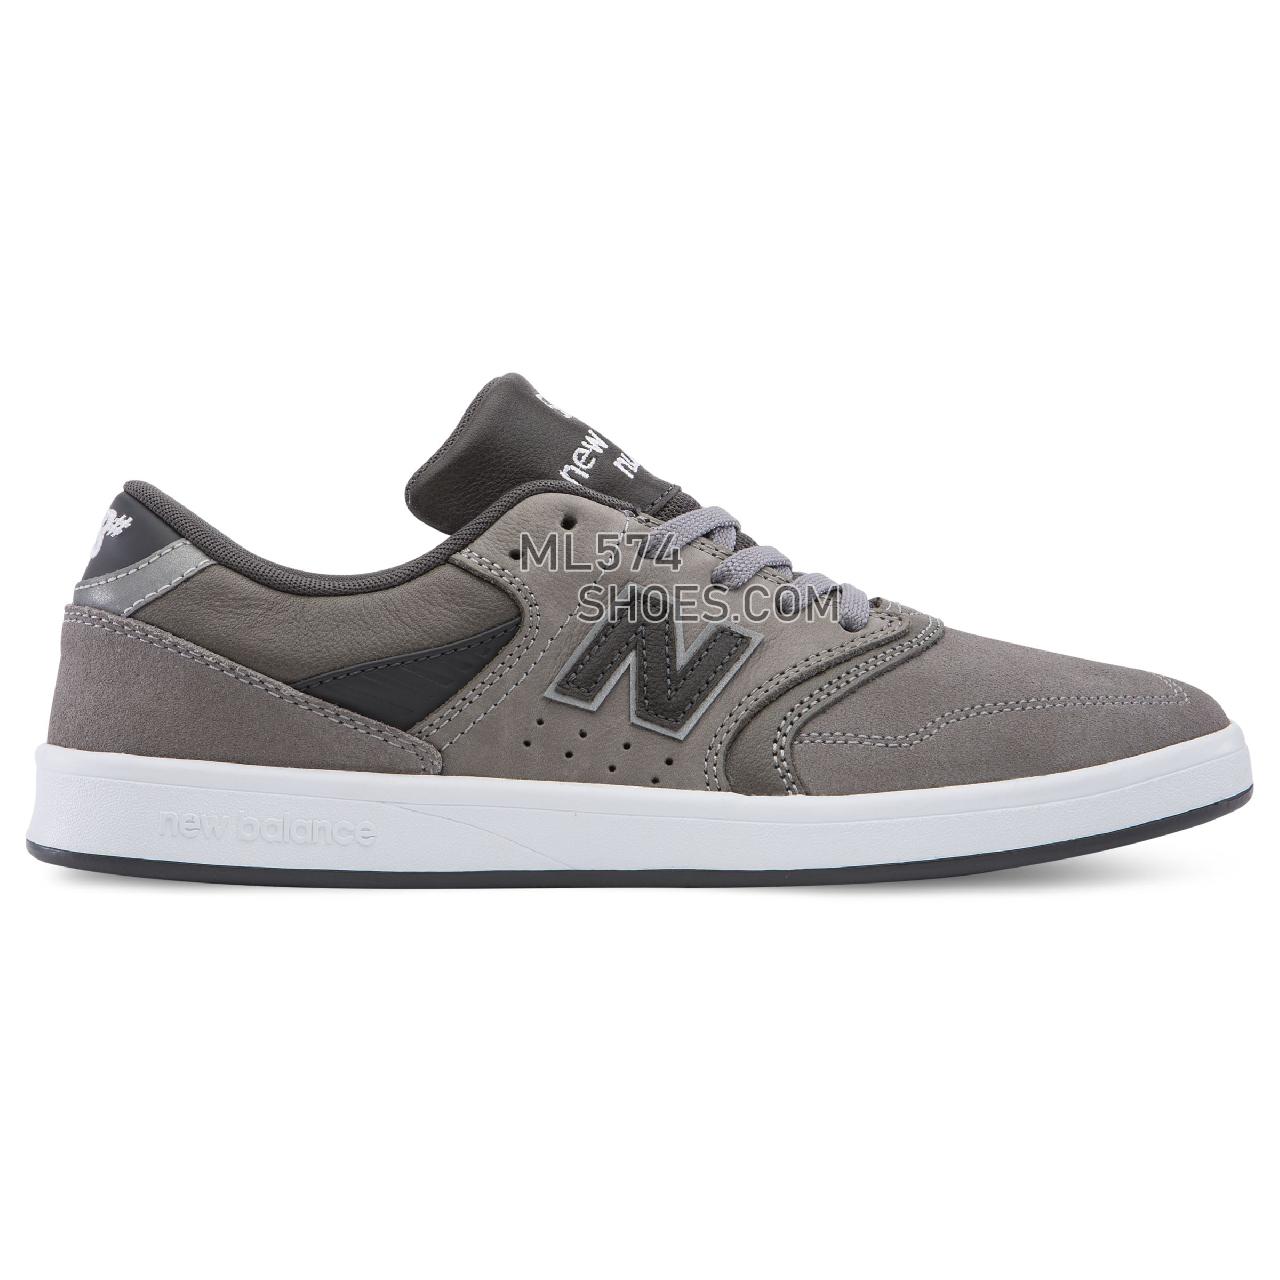 New Balance 598 - Men's 598 - Classic Grey with Charcoal - NM598GGG